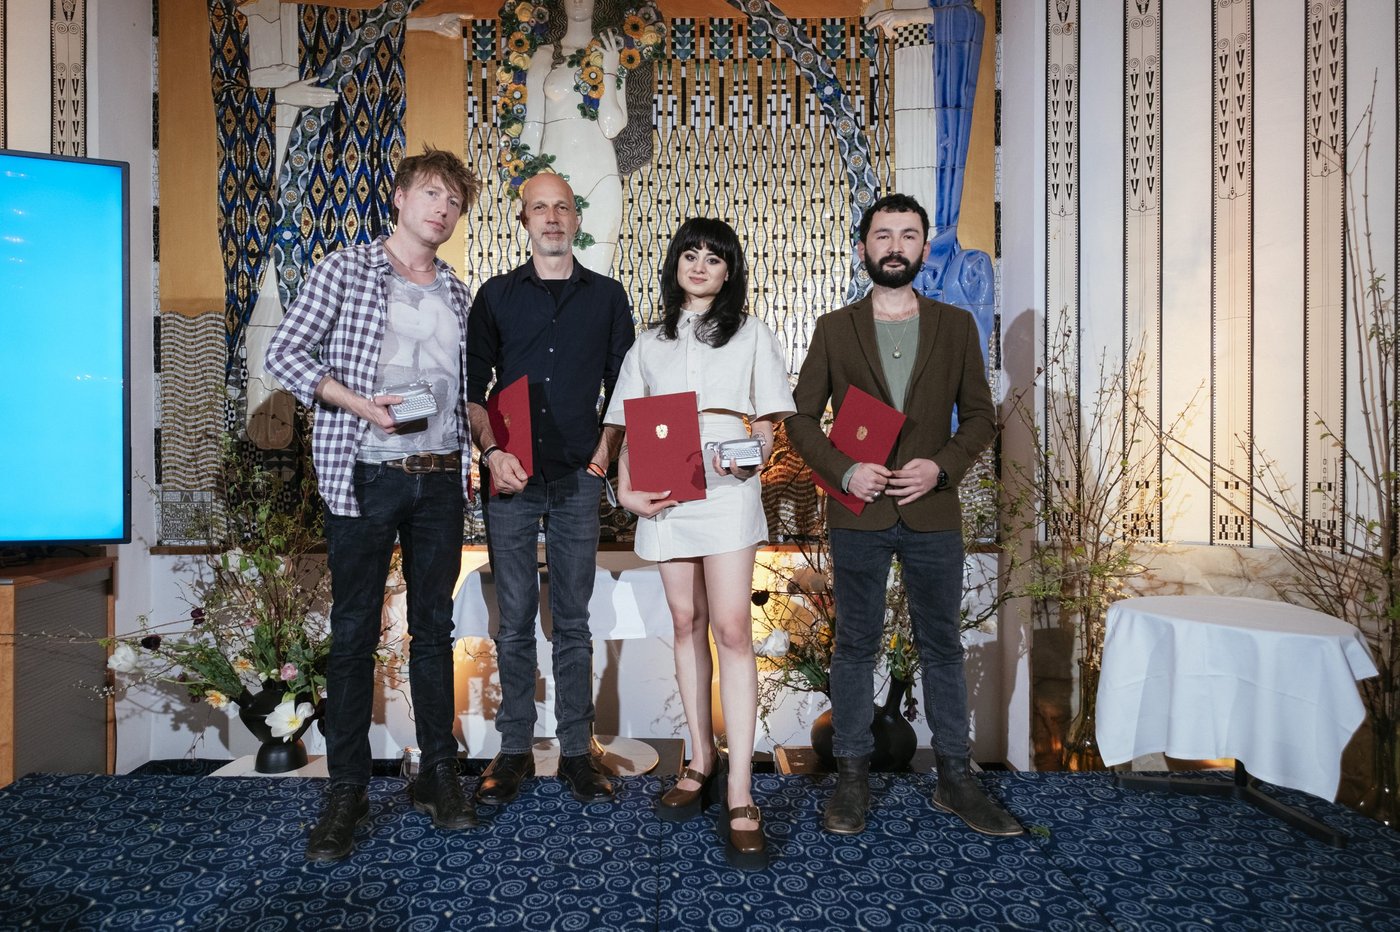 Photo of the four award winners, two men, a woman in the middle and a man to her right, all holding a red certificate in their hands, standing side by side in front of a Klimt mural on a dark blue carpeted floor